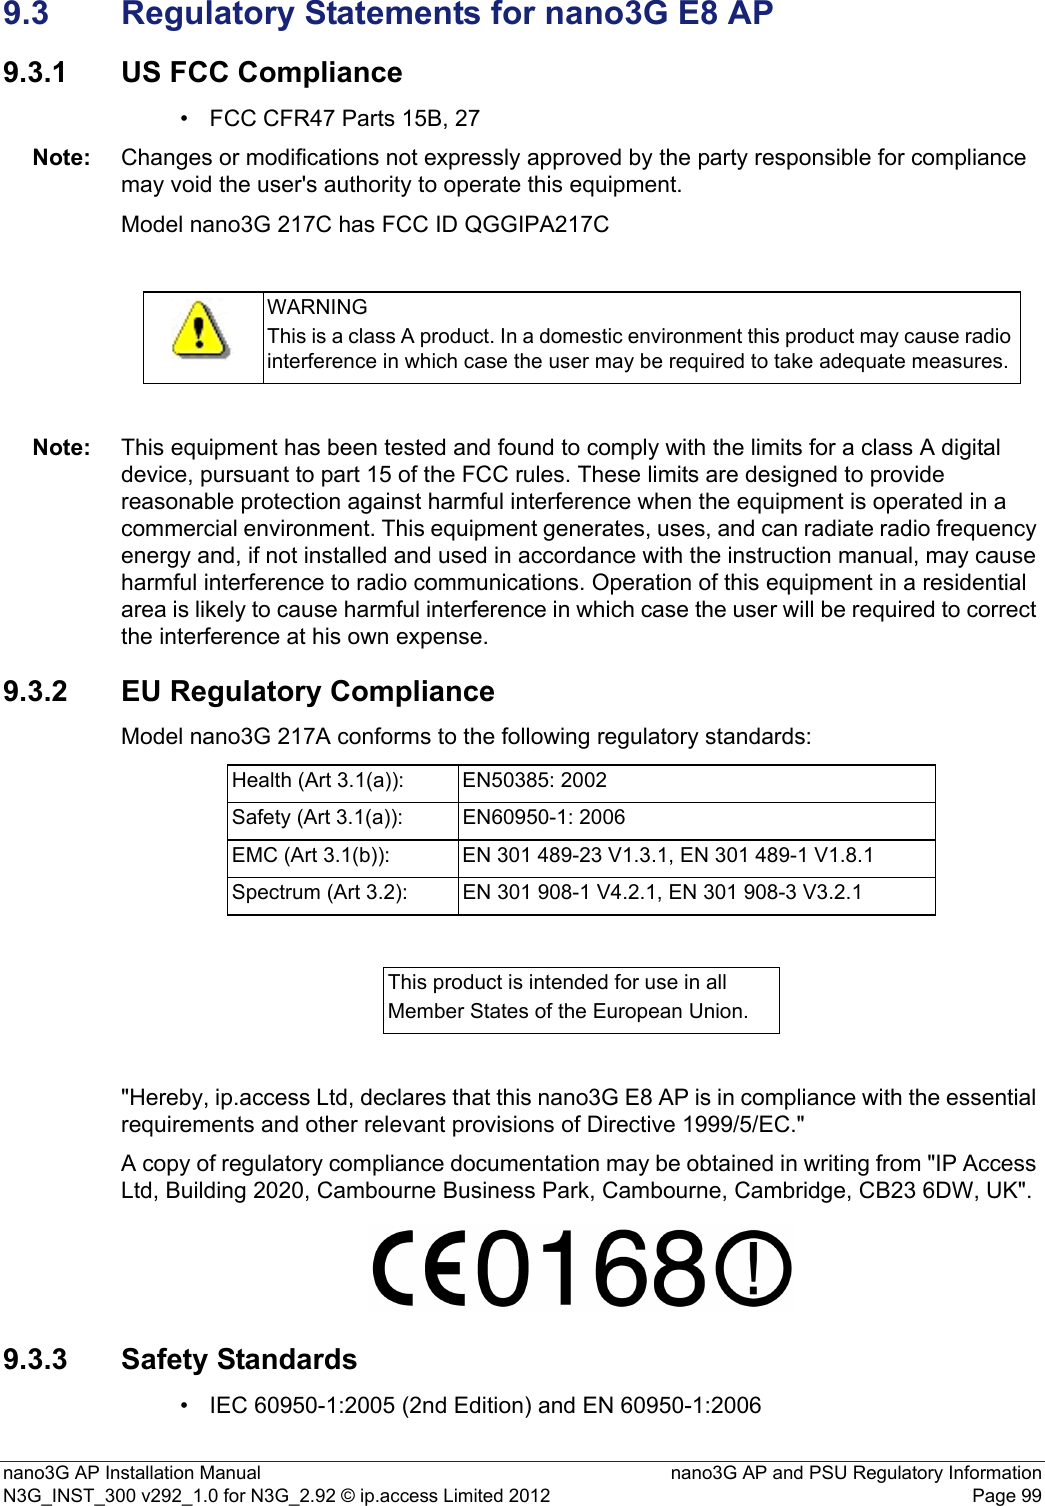 nano3G AP Installation Manual nano3G AP and PSU Regulatory InformationN3G_INST_300 v292_1.0 for N3G_2.92 © ip.access Limited 2012 Page 999.3 Regulatory Statements for nano3G E8 AP9.3.1 US FCC Compliance• FCC CFR47 Parts 15B, 27Note: Changes or modifications not expressly approved by the party responsible for compliance may void the user&apos;s authority to operate this equipment.Model nano3G 217C has FCC ID QGGIPA217CNote: This equipment has been tested and found to comply with the limits for a class A digital device, pursuant to part 15 of the FCC rules. These limits are designed to provide reasonable protection against harmful interference when the equipment is operated in a commercial environment. This equipment generates, uses, and can radiate radio frequency energy and, if not installed and used in accordance with the instruction manual, may cause harmful interference to radio communications. Operation of this equipment in a residential area is likely to cause harmful interference in which case the user will be required to correct the interference at his own expense.9.3.2 EU Regulatory ComplianceModel nano3G 217A conforms to the following regulatory standards:&quot;Hereby, ip.access Ltd, declares that this nano3G E8 AP is in compliance with the essential requirements and other relevant provisions of Directive 1999/5/EC.&quot;A copy of regulatory compliance documentation may be obtained in writing from &quot;IP Access Ltd, Building 2020, Cambourne Business Park, Cambourne, Cambridge, CB23 6DW, UK&quot;.9.3.3 Safety Standards• IEC 60950-1:2005 (2nd Edition) and EN 60950-1:2006WARNINGThis is a class A product. In a domestic environment this product may cause radio interference in which case the user may be required to take adequate measures.Health (Art 3.1(a)): EN50385: 2002Safety (Art 3.1(a)): EN60950-1: 2006EMC (Art 3.1(b)): EN 301 489-23 V1.3.1, EN 301 489-1 V1.8.1Spectrum (Art 3.2): EN 301 908-1 V4.2.1, EN 301 908-3 V3.2.1This product is intended for use in allMember States of the European Union.